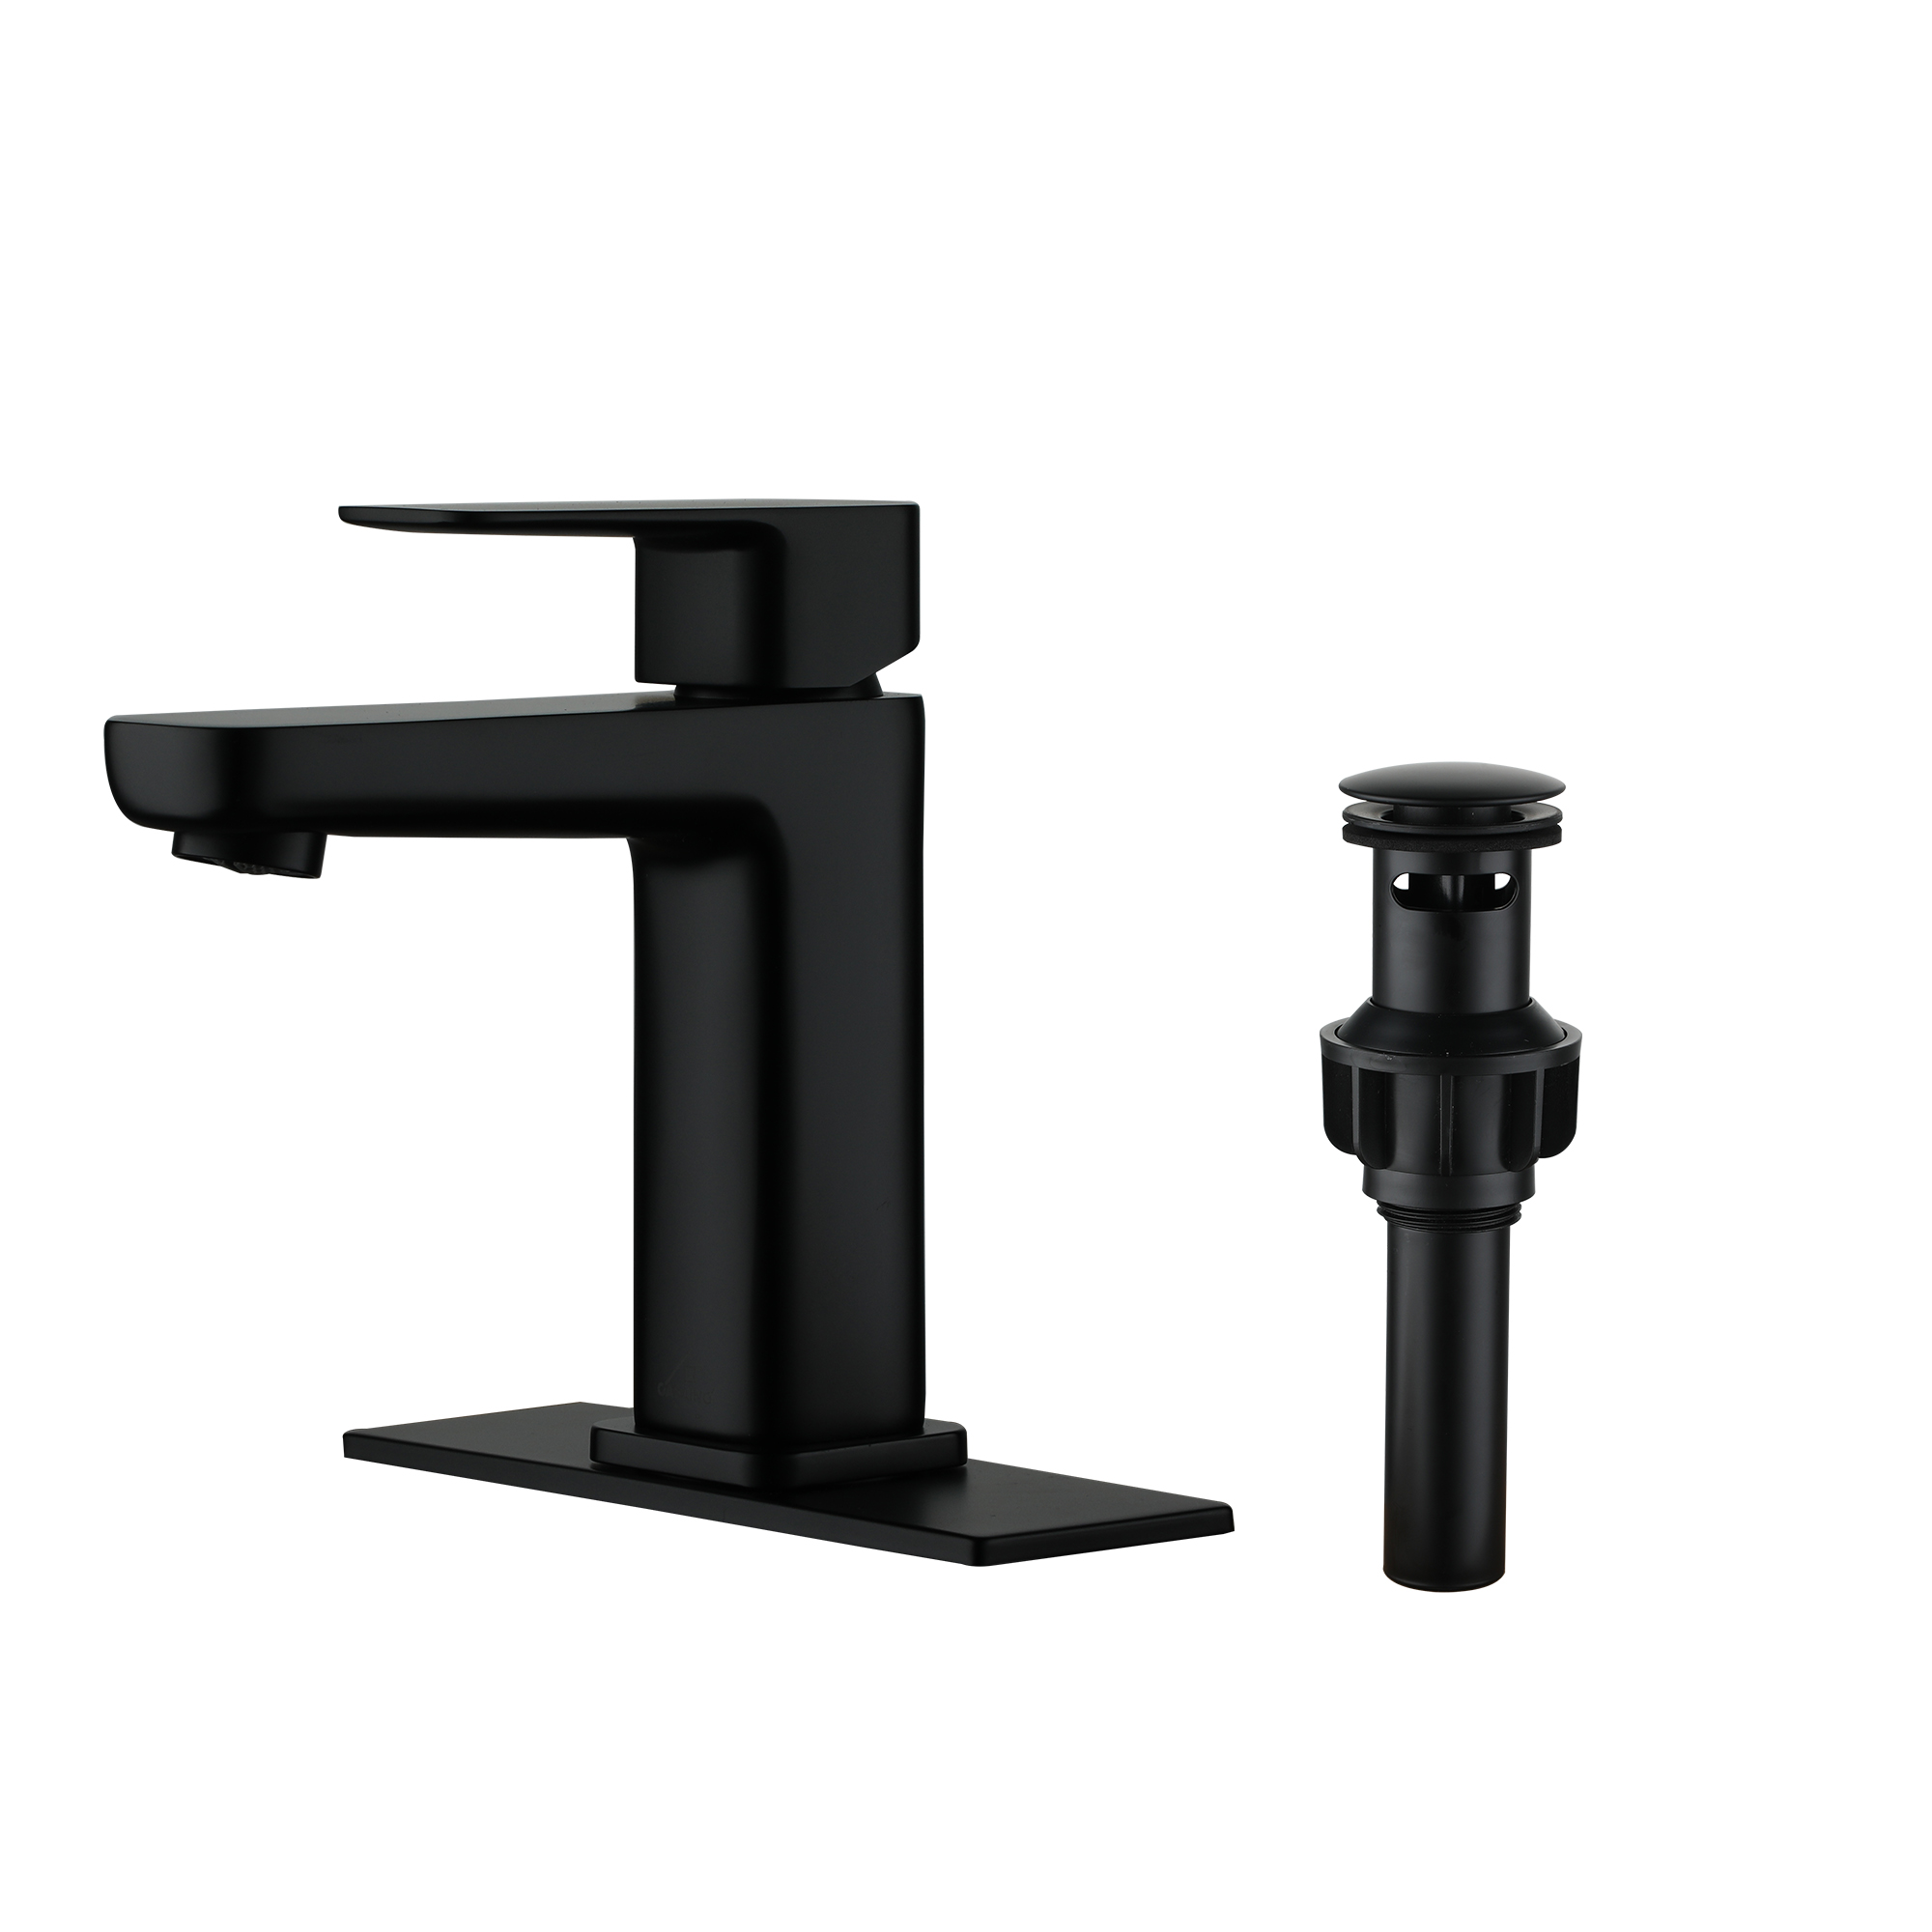 Single Handle Bathroom Basin Faucet with Drainer and Deckplate